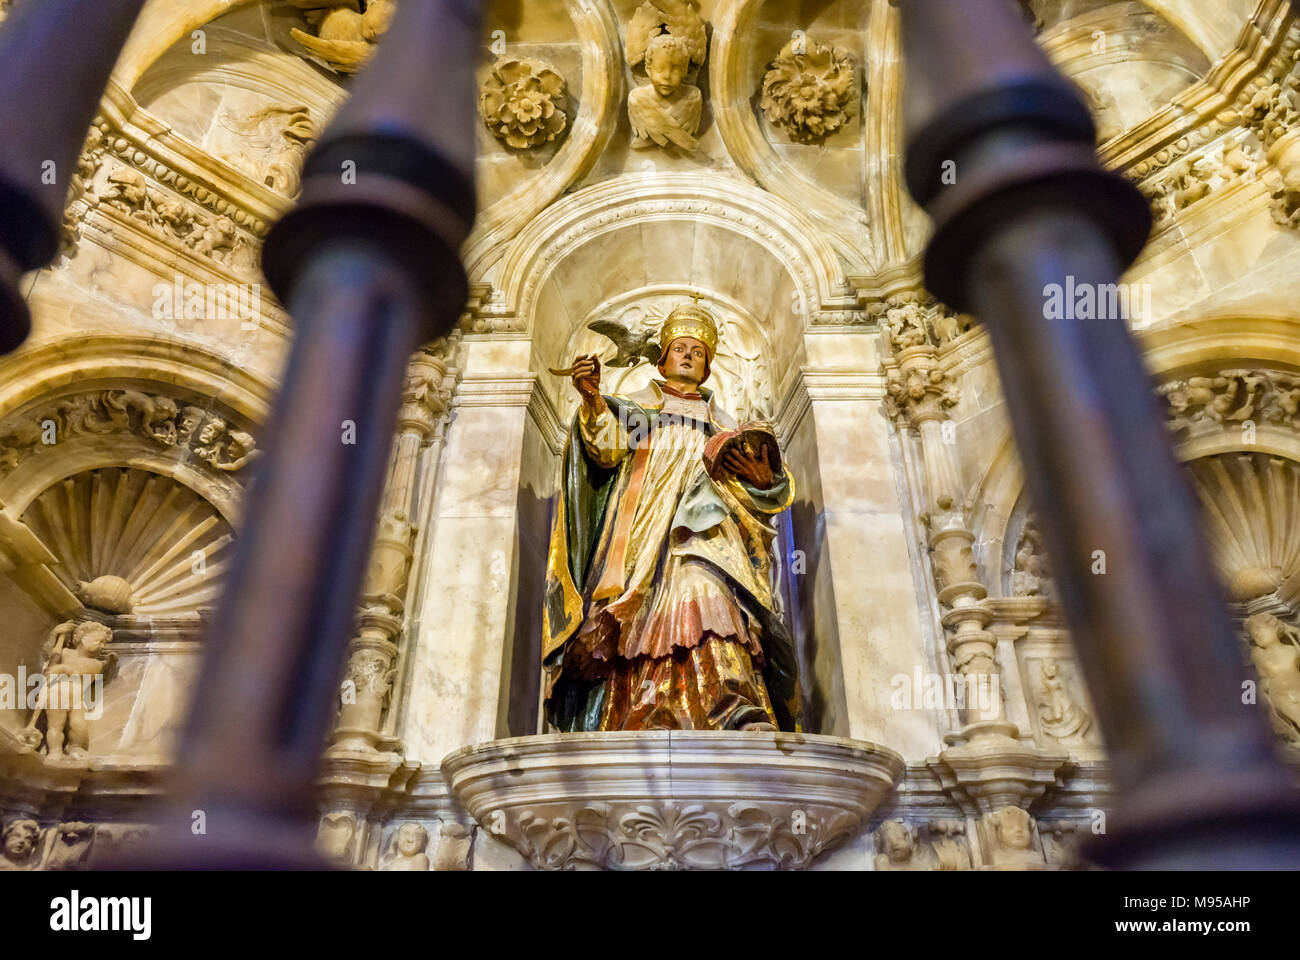 Gothic sculpture in side chapel of the Seville Cathedral (Catedral de Santa María de la Sede) in Seville, Andalusia, Spain Stock Photo